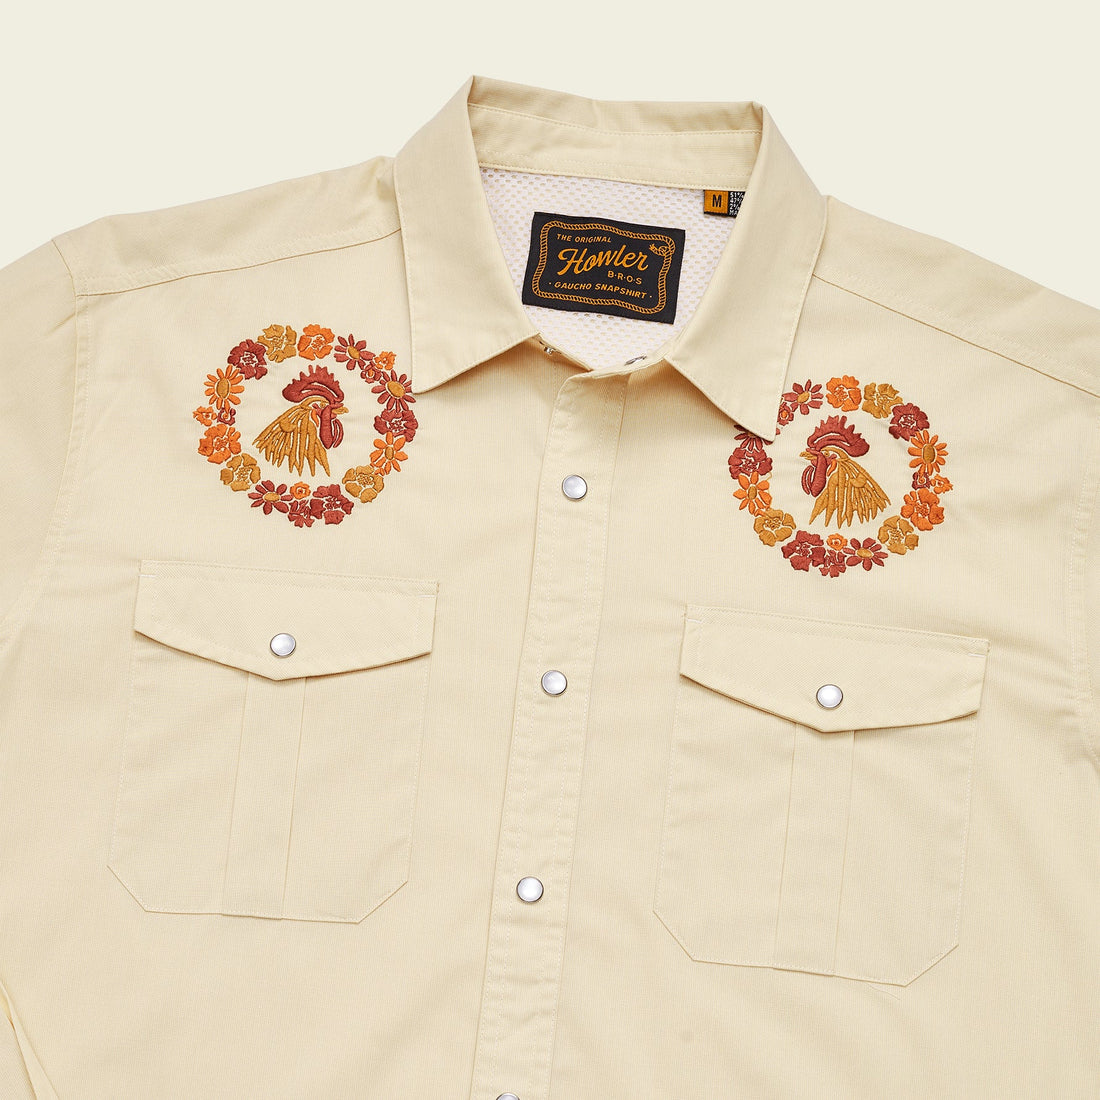 Howler Bros Gaucho Snapshirt Rooster